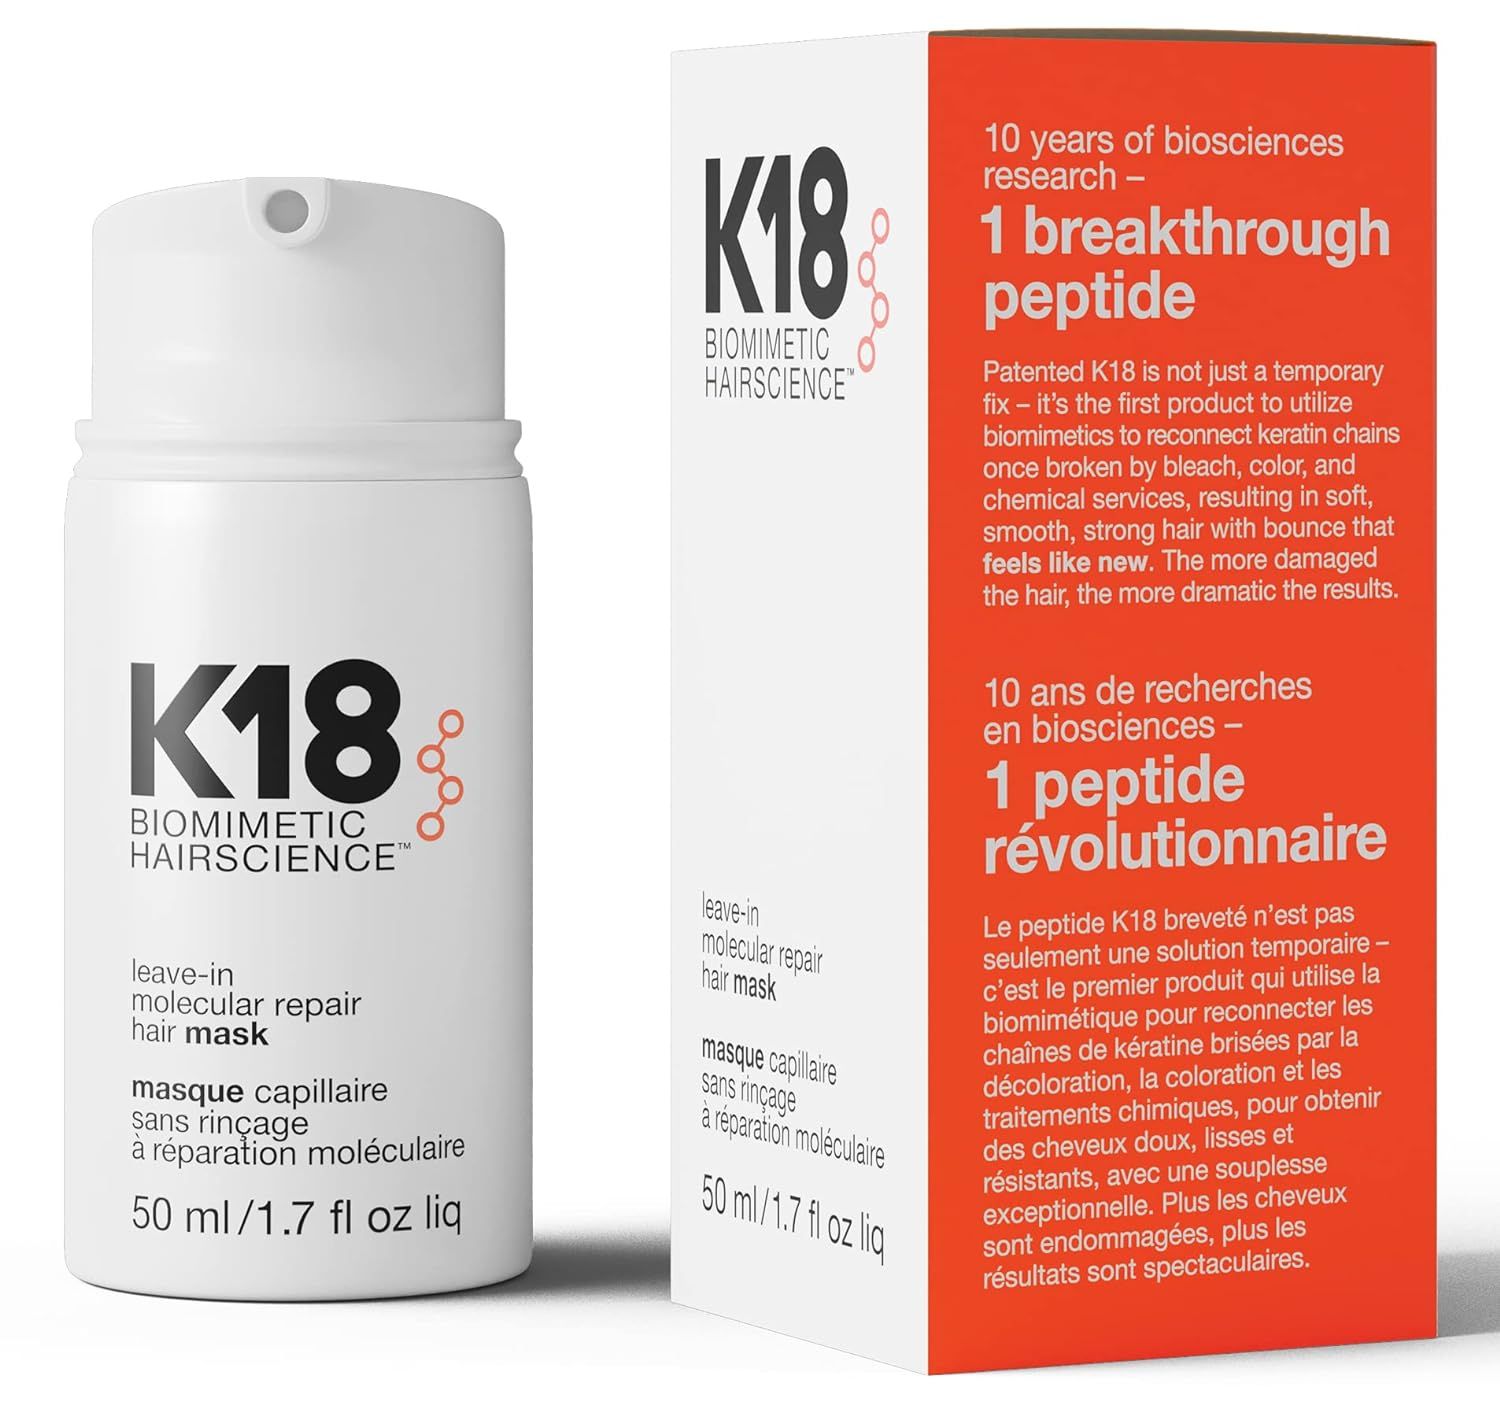 K18 Leave-In Molecular Repair Hair Mask Treatment to Repair Damaged Hair - 4 Minutes to Reverse D... | Amazon (US)